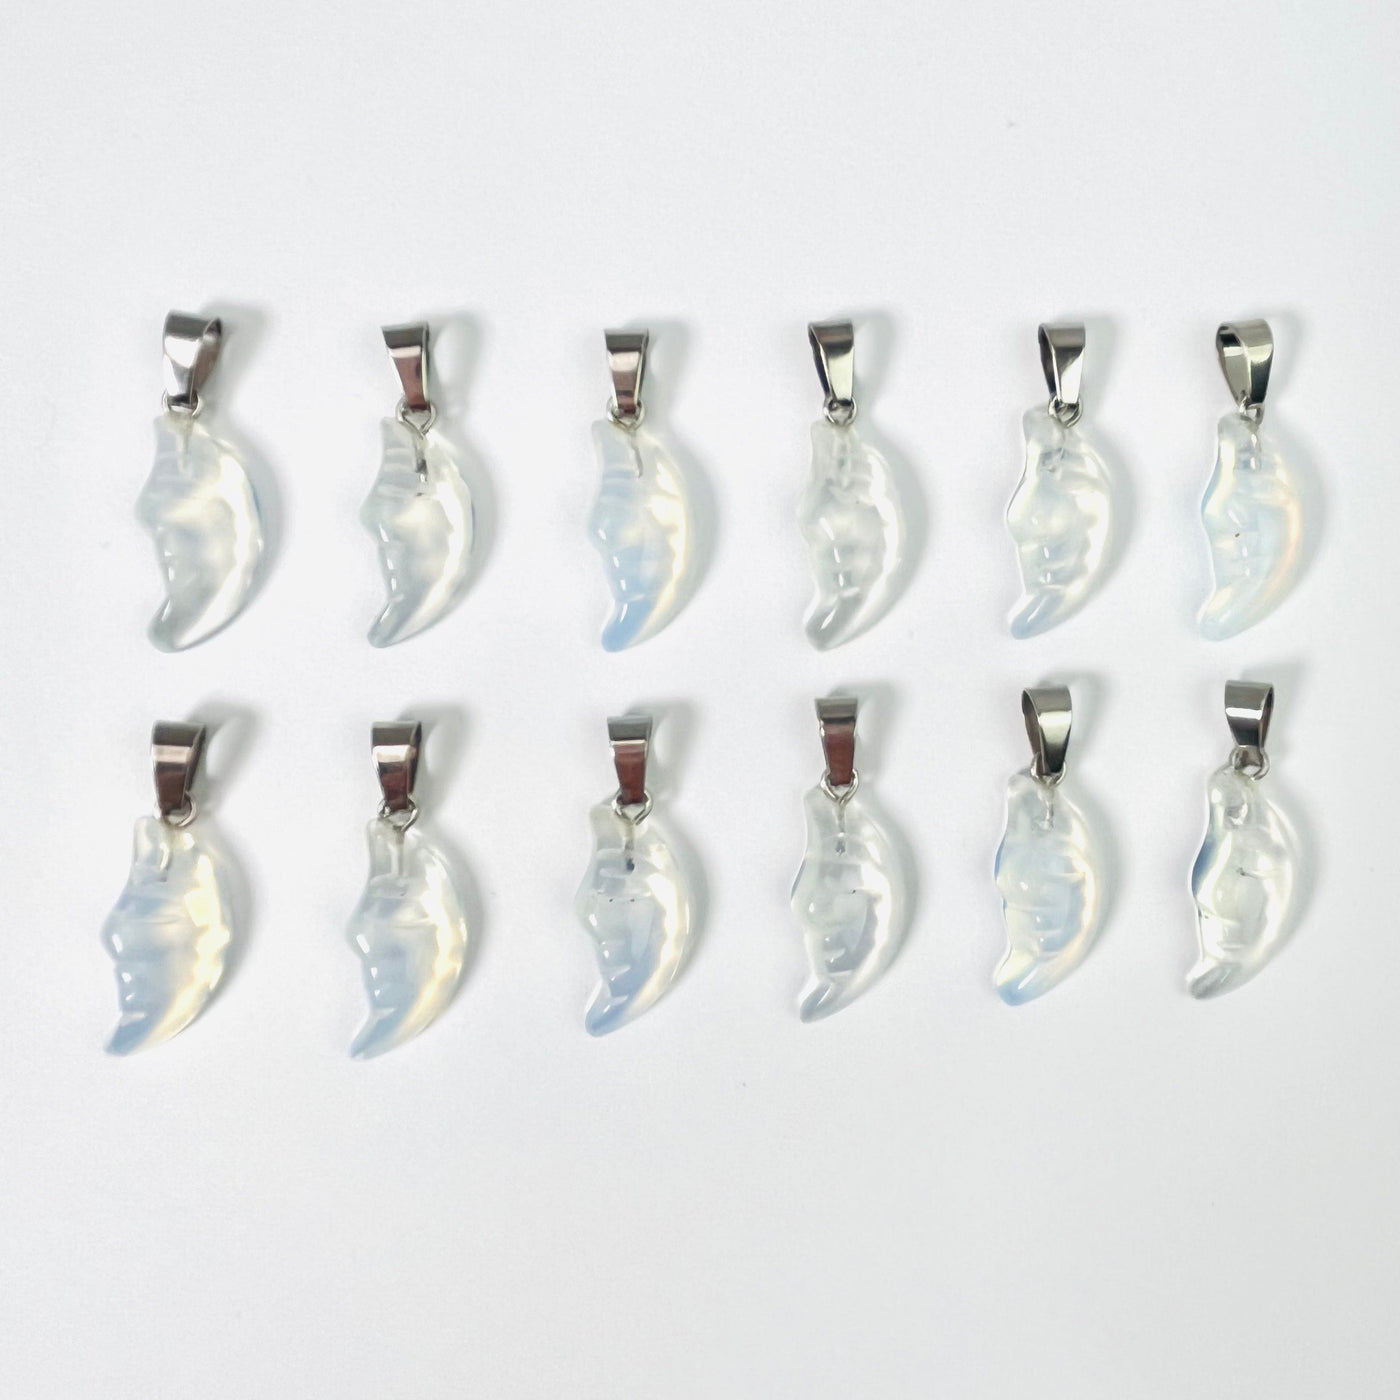 Twelve Opalite Crescent Moon Gemstones Pendants lined up in two rows on a white surface.